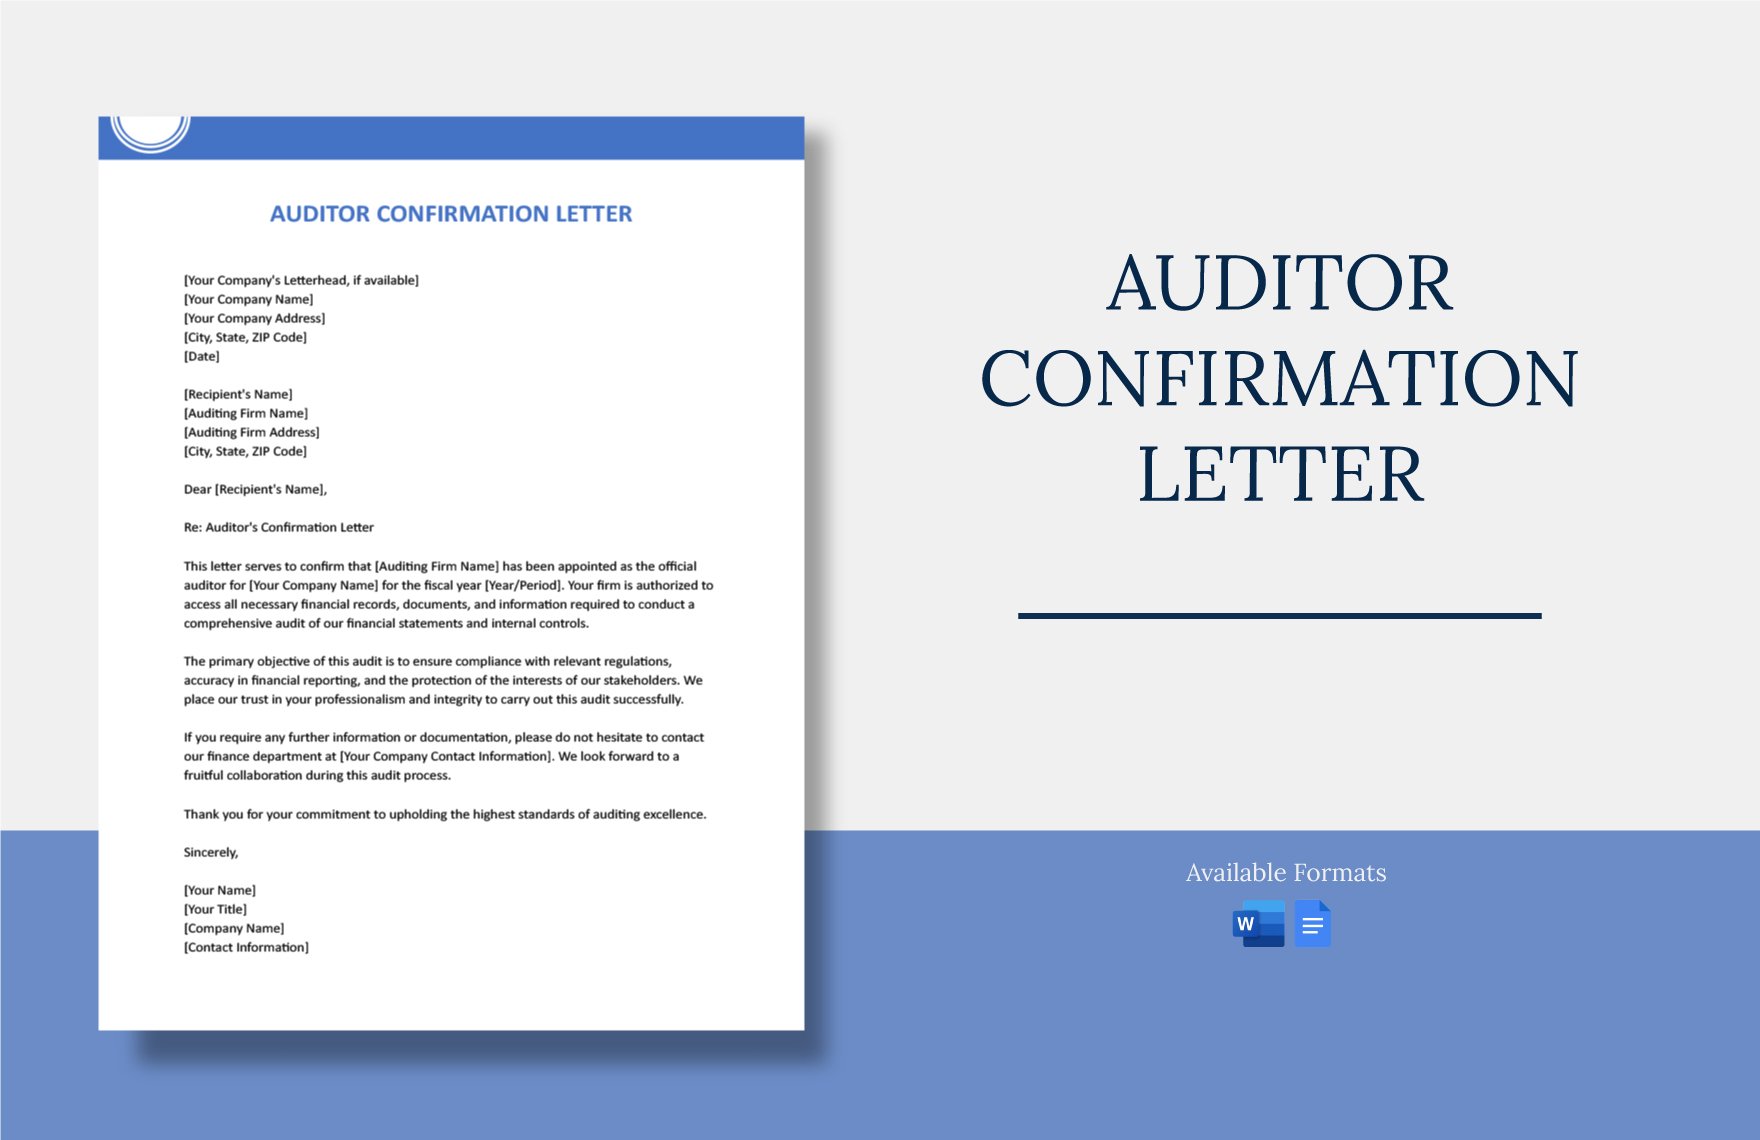 Auditor Confirmation Letter in Word, Google Docs